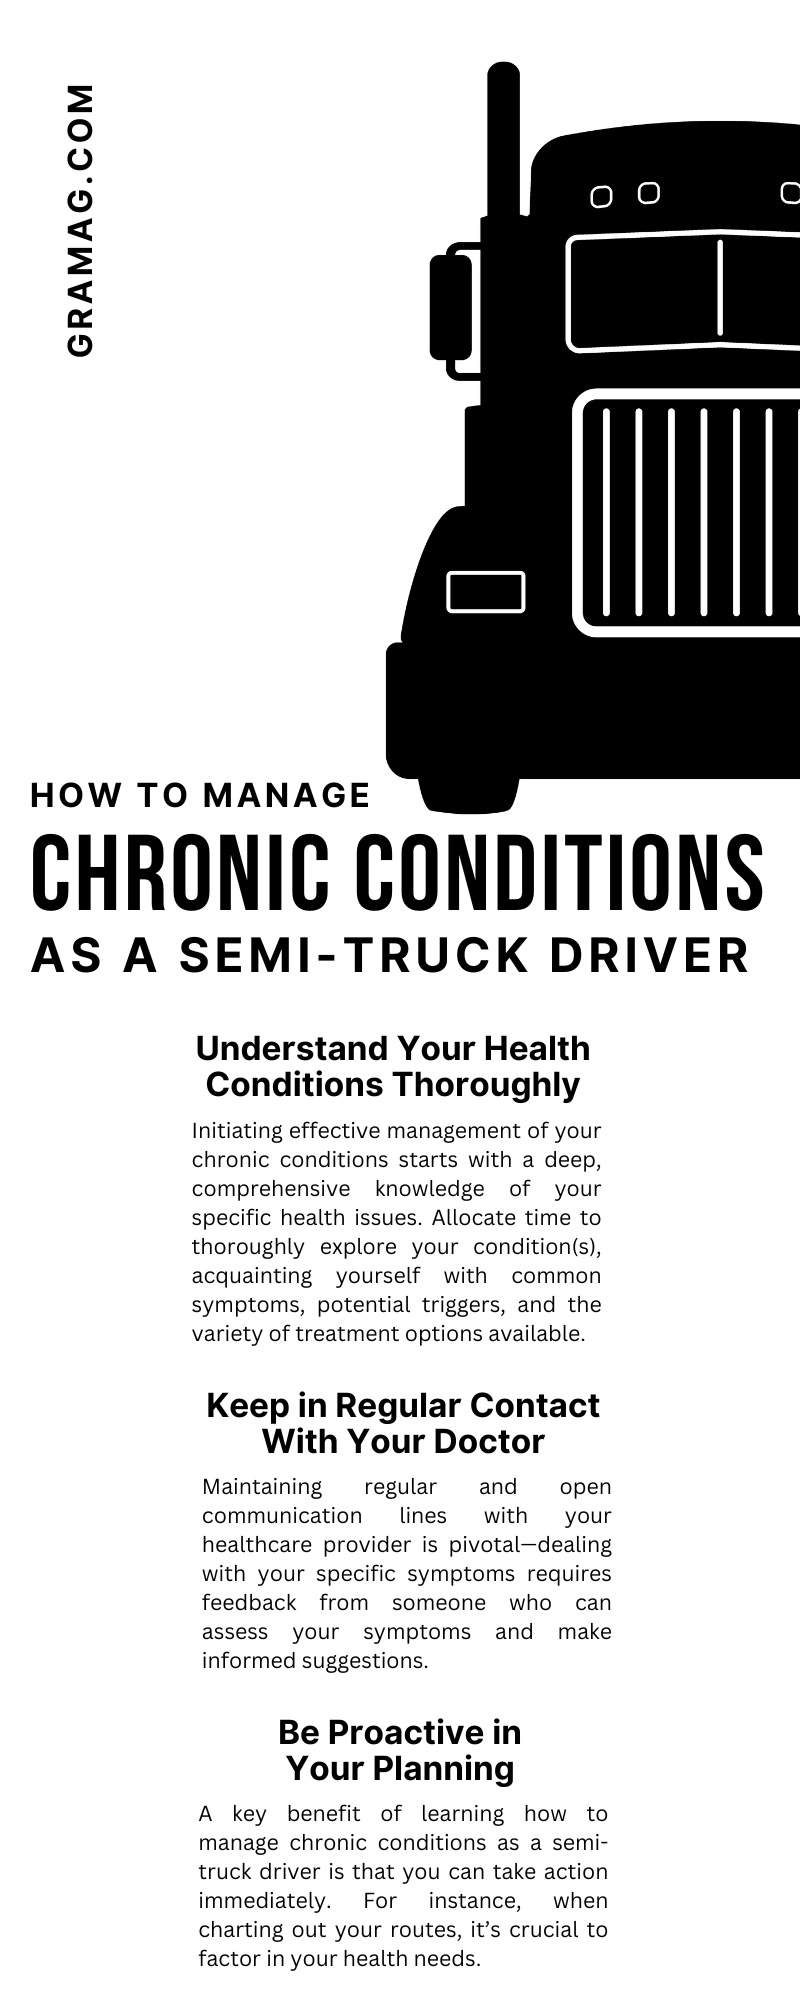 How To Manage Chronic Conditions as a Semi-Truck Driver